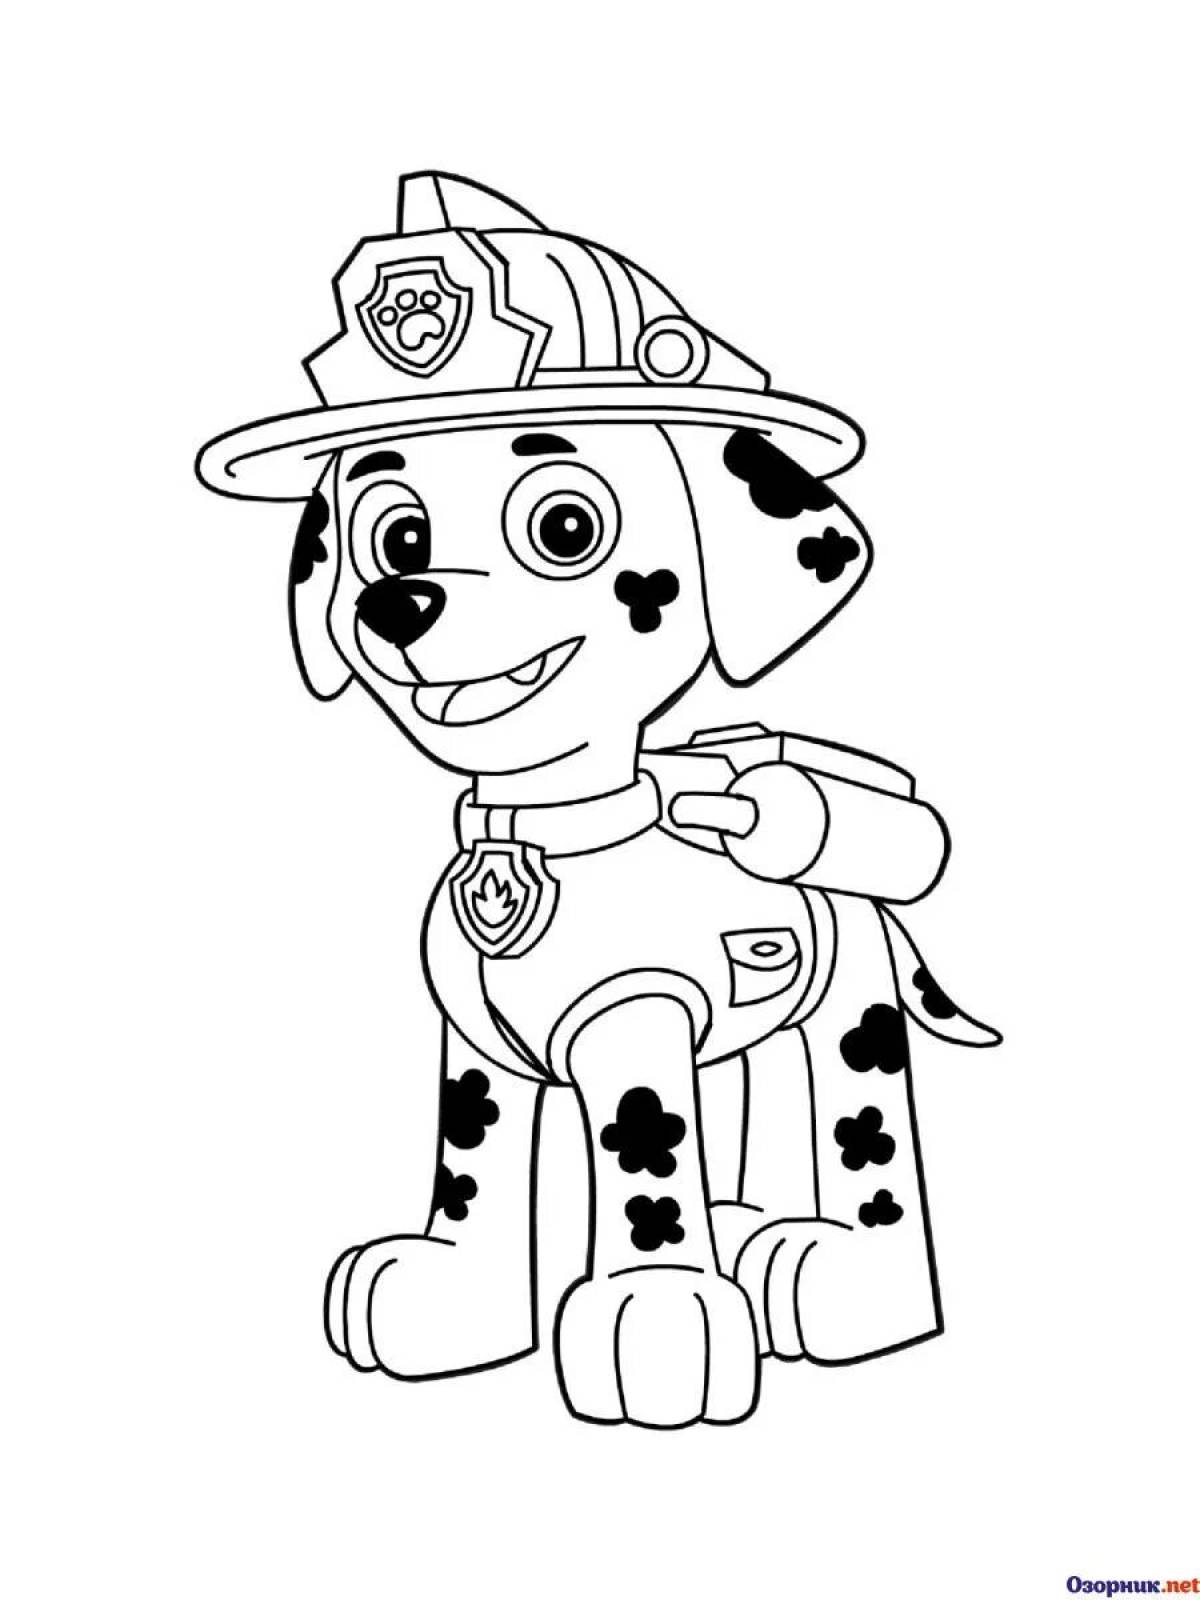 Cute marshal coloring pages for kids